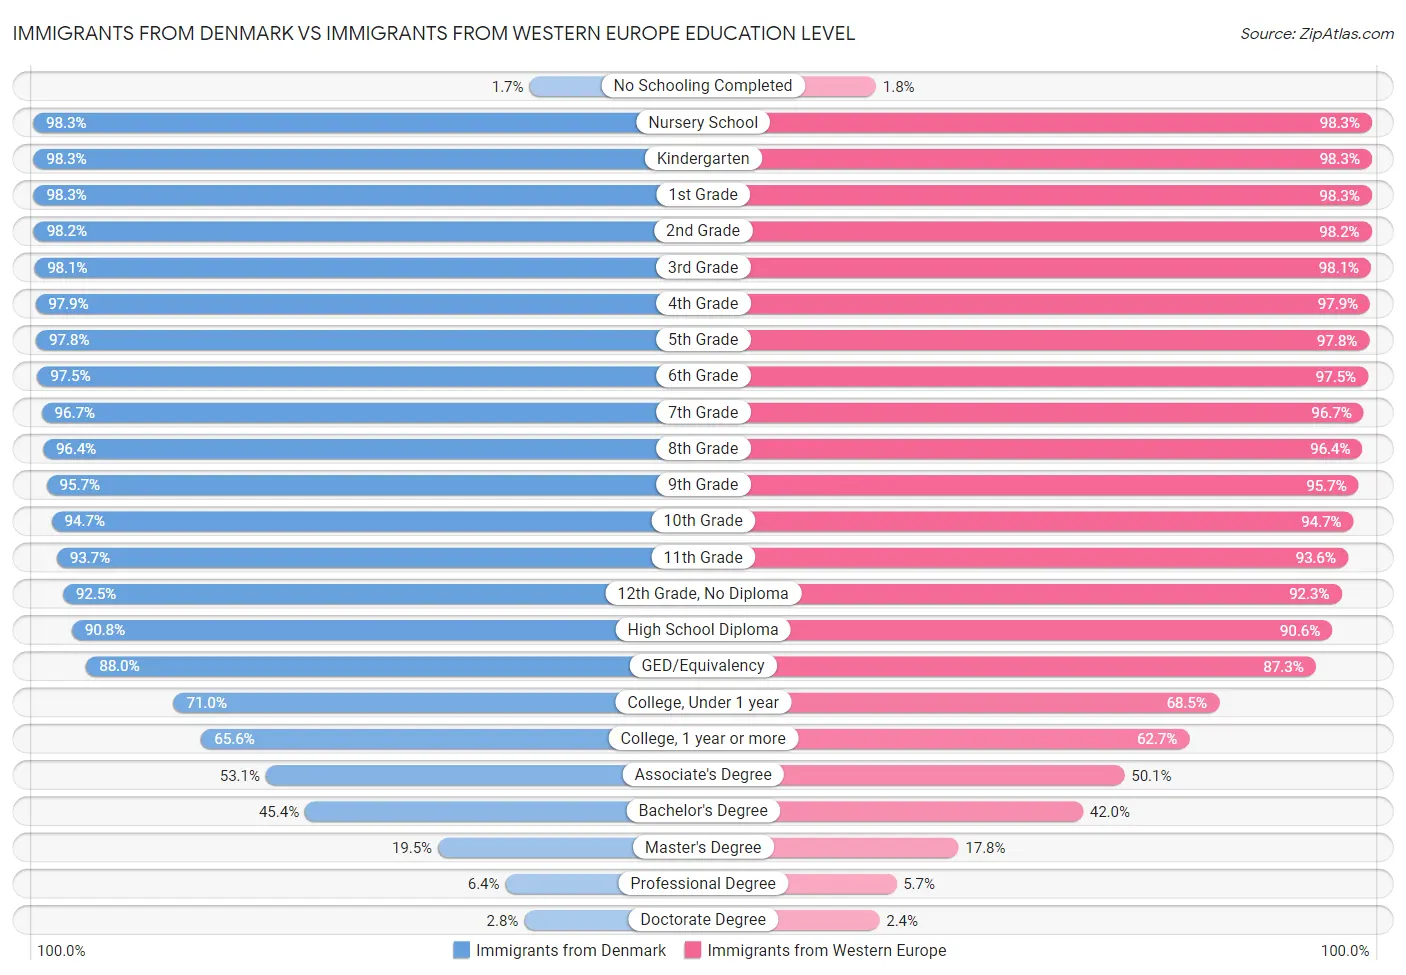 Immigrants from Denmark vs Immigrants from Western Europe Education Level